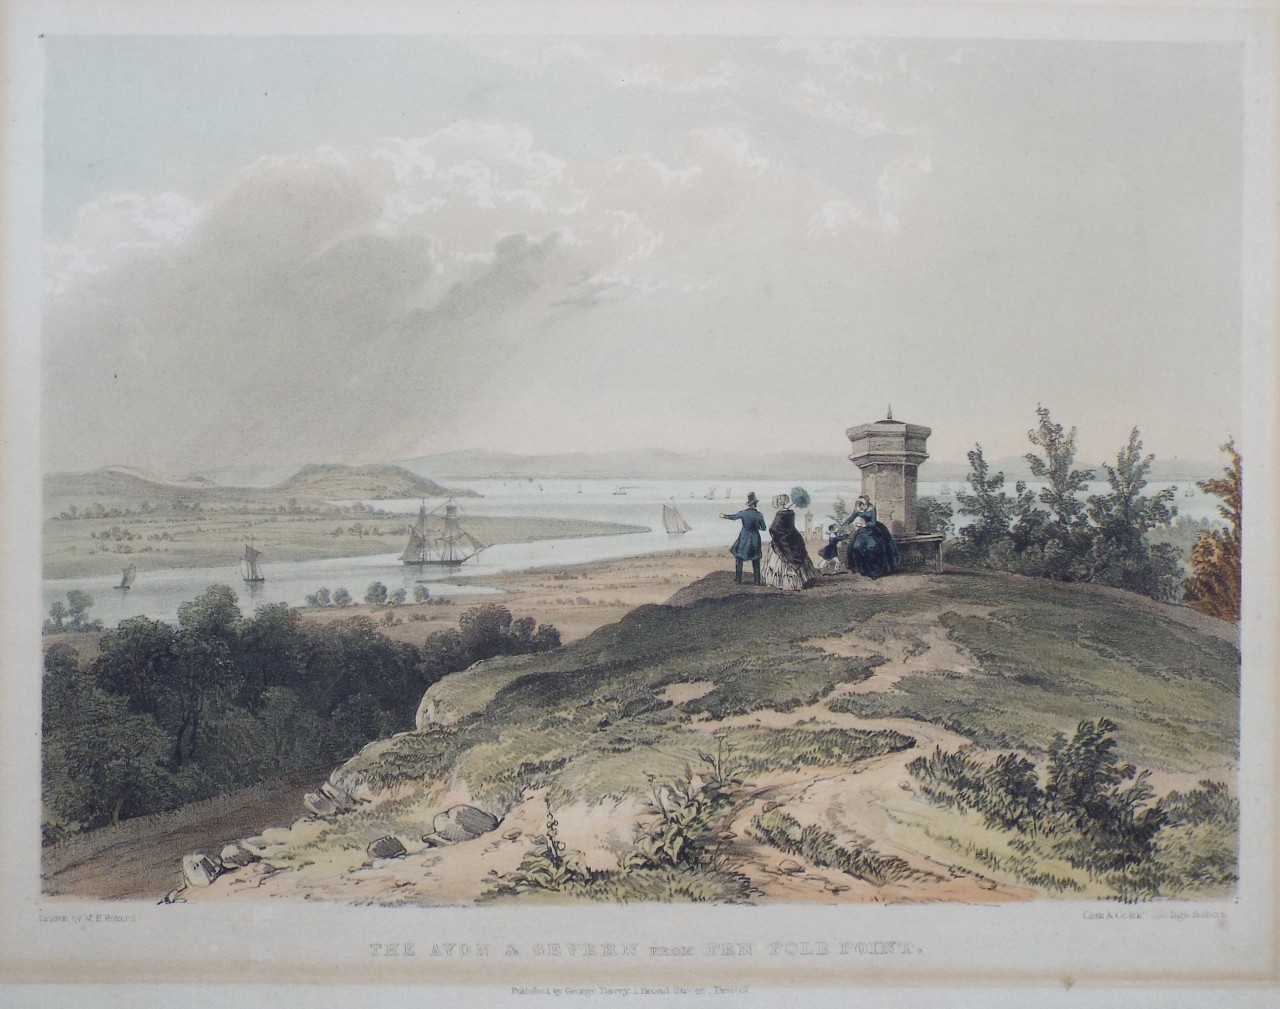 Lithograph - The Avon & Severn from Pen Pole Point.